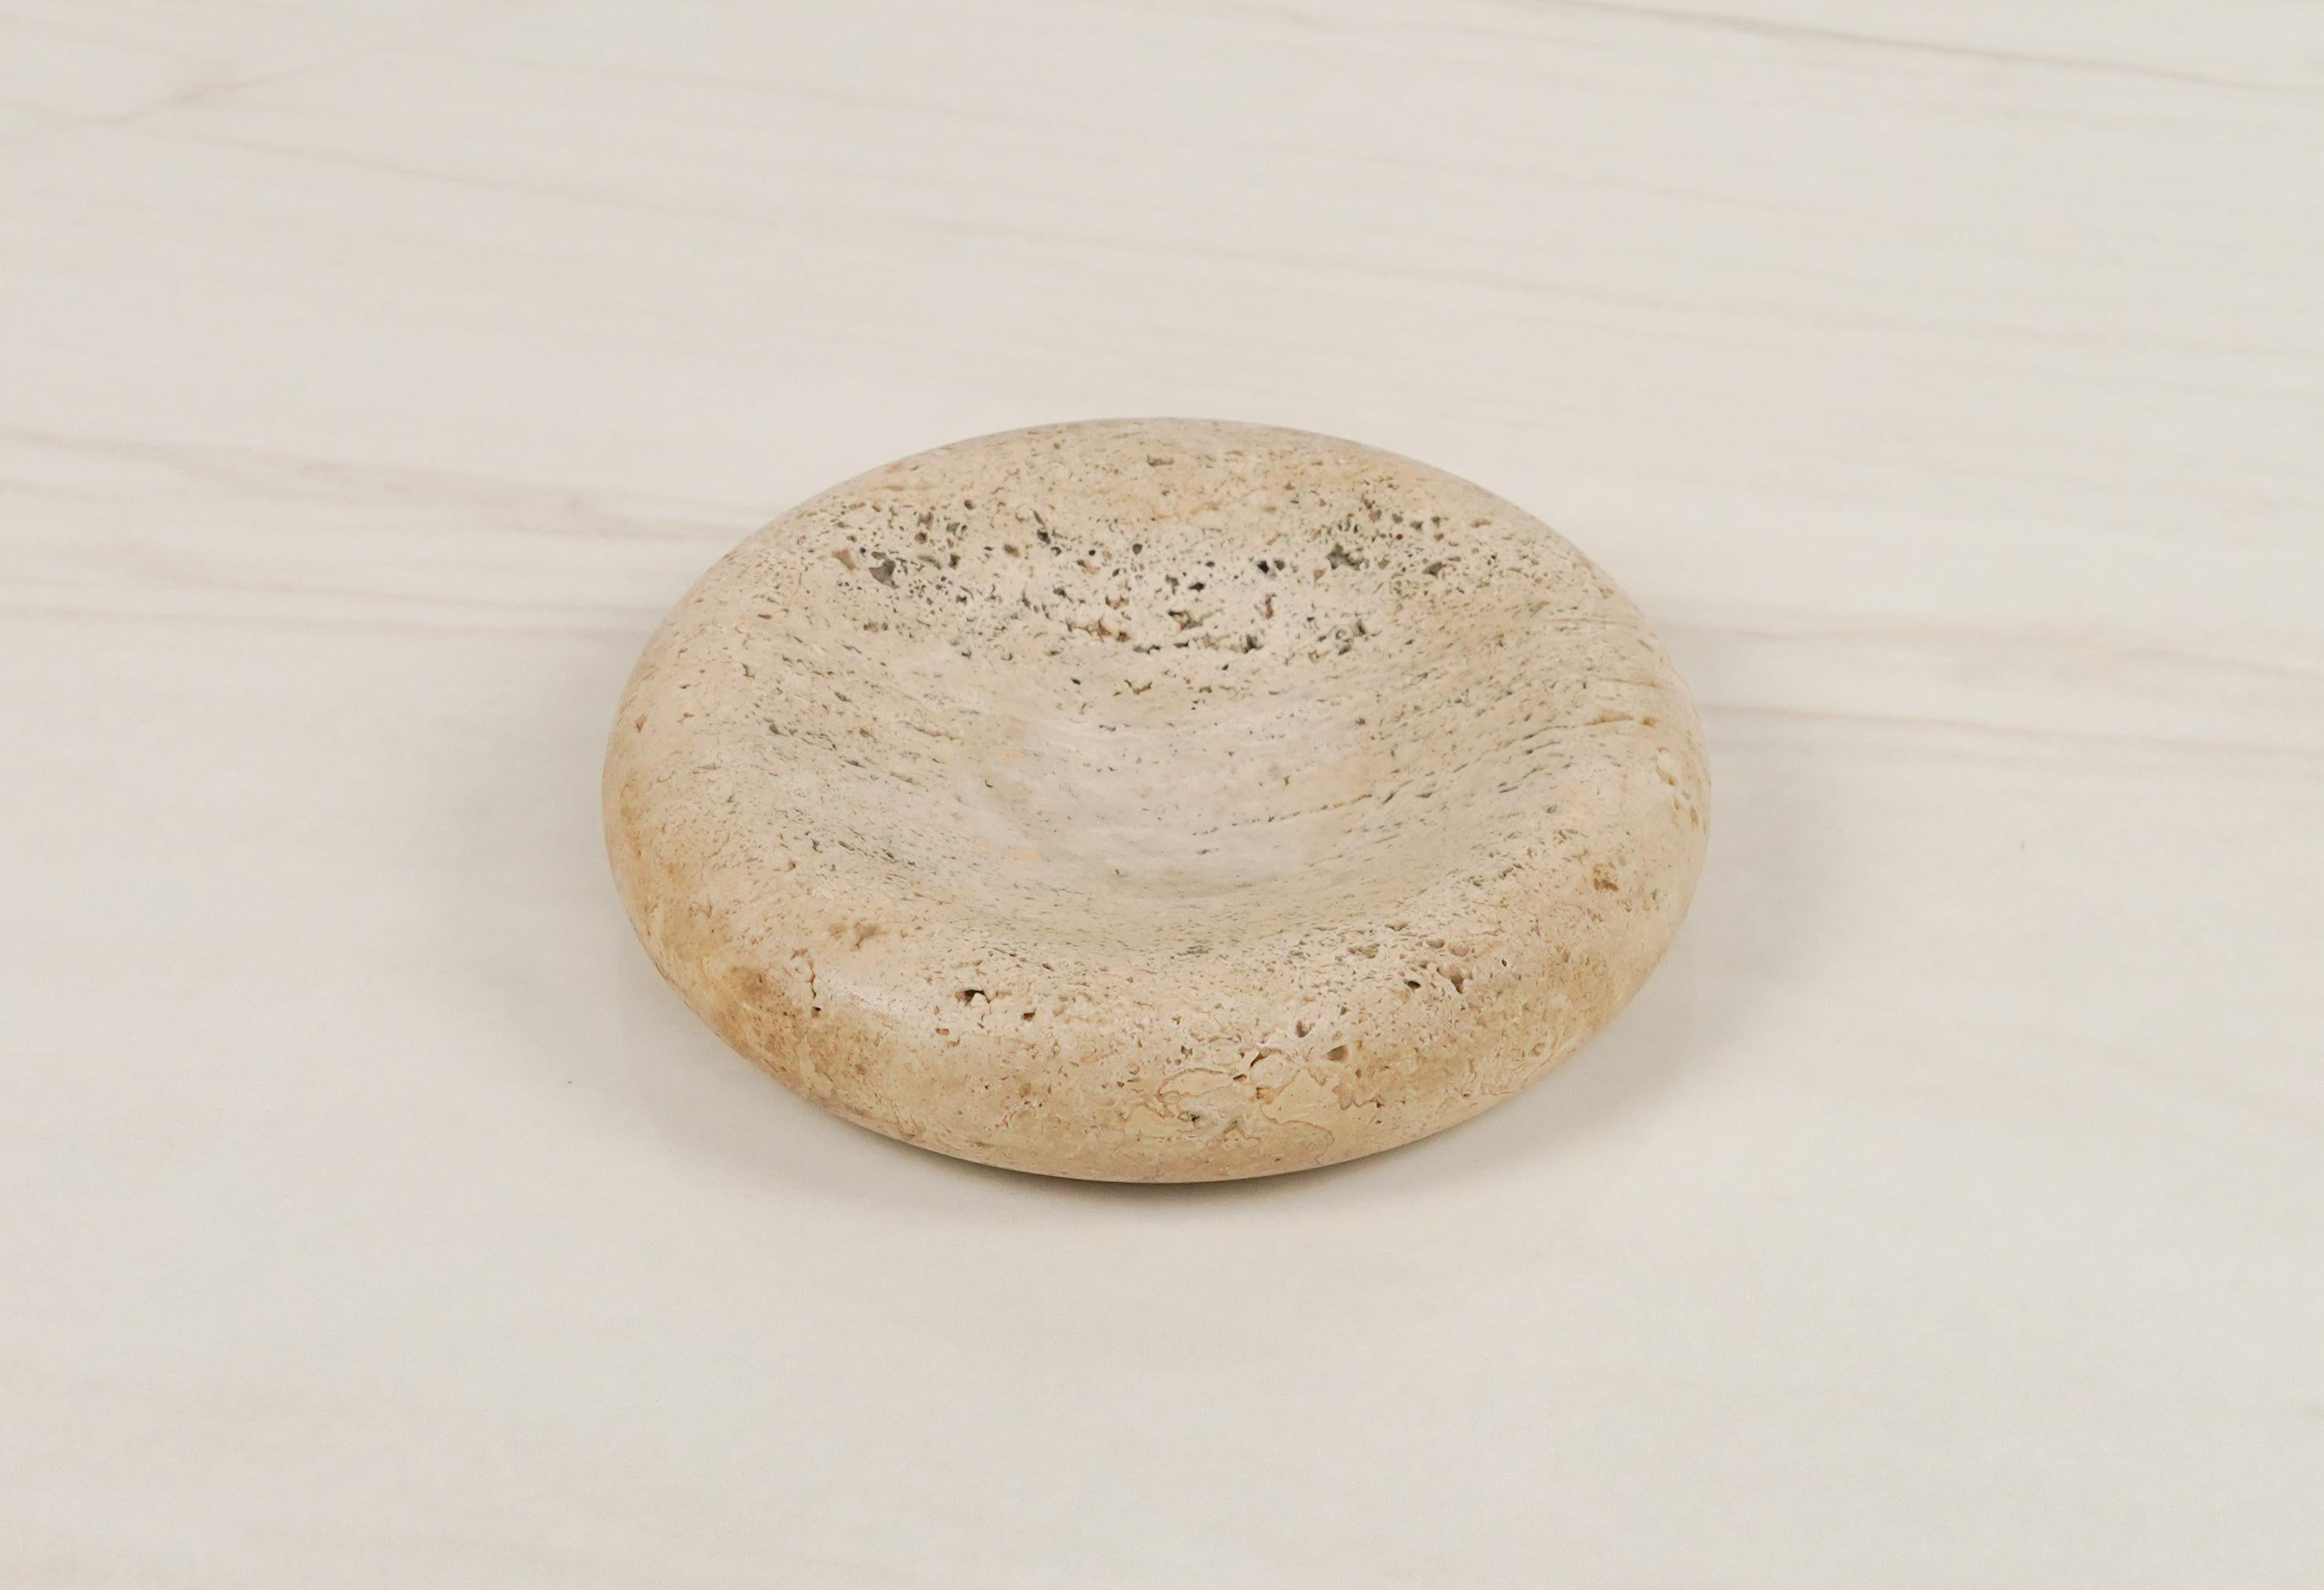 Amazing Midcentury round bowl or ashtray in travertine by Egidio Di Rosa & Pier Alessandro Giusti for Up & Up.

The original label is still attached on the piece, as visible in the photos.

Perfect desk object or gift idea.